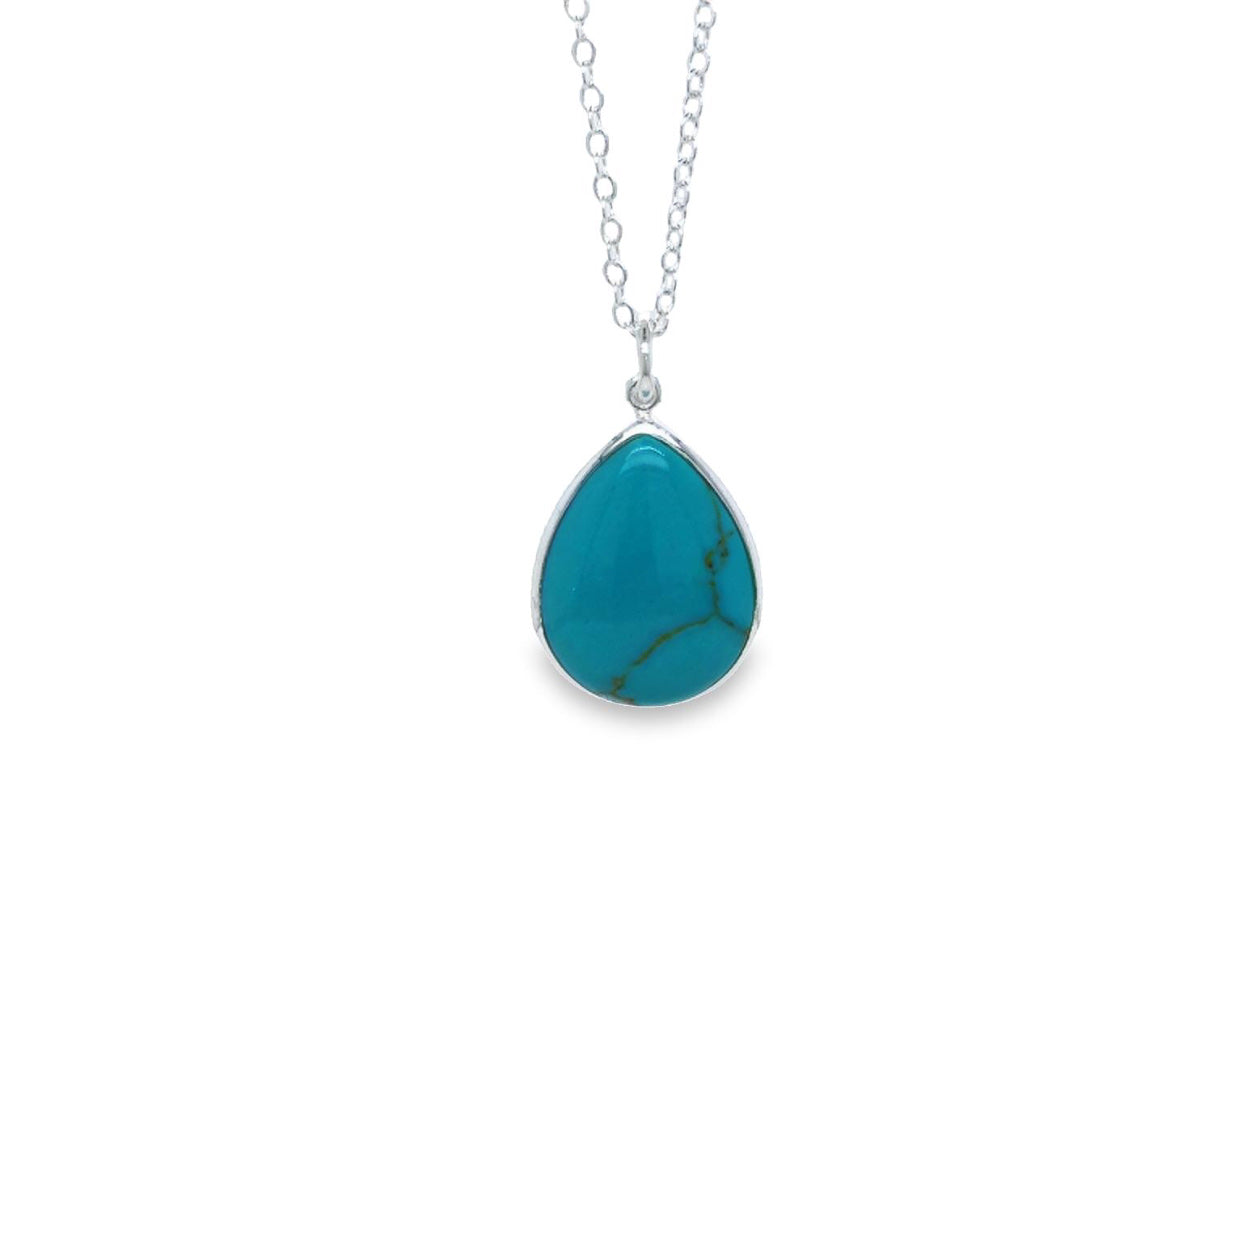 Silver Pear Shaped Turquoise Pendant